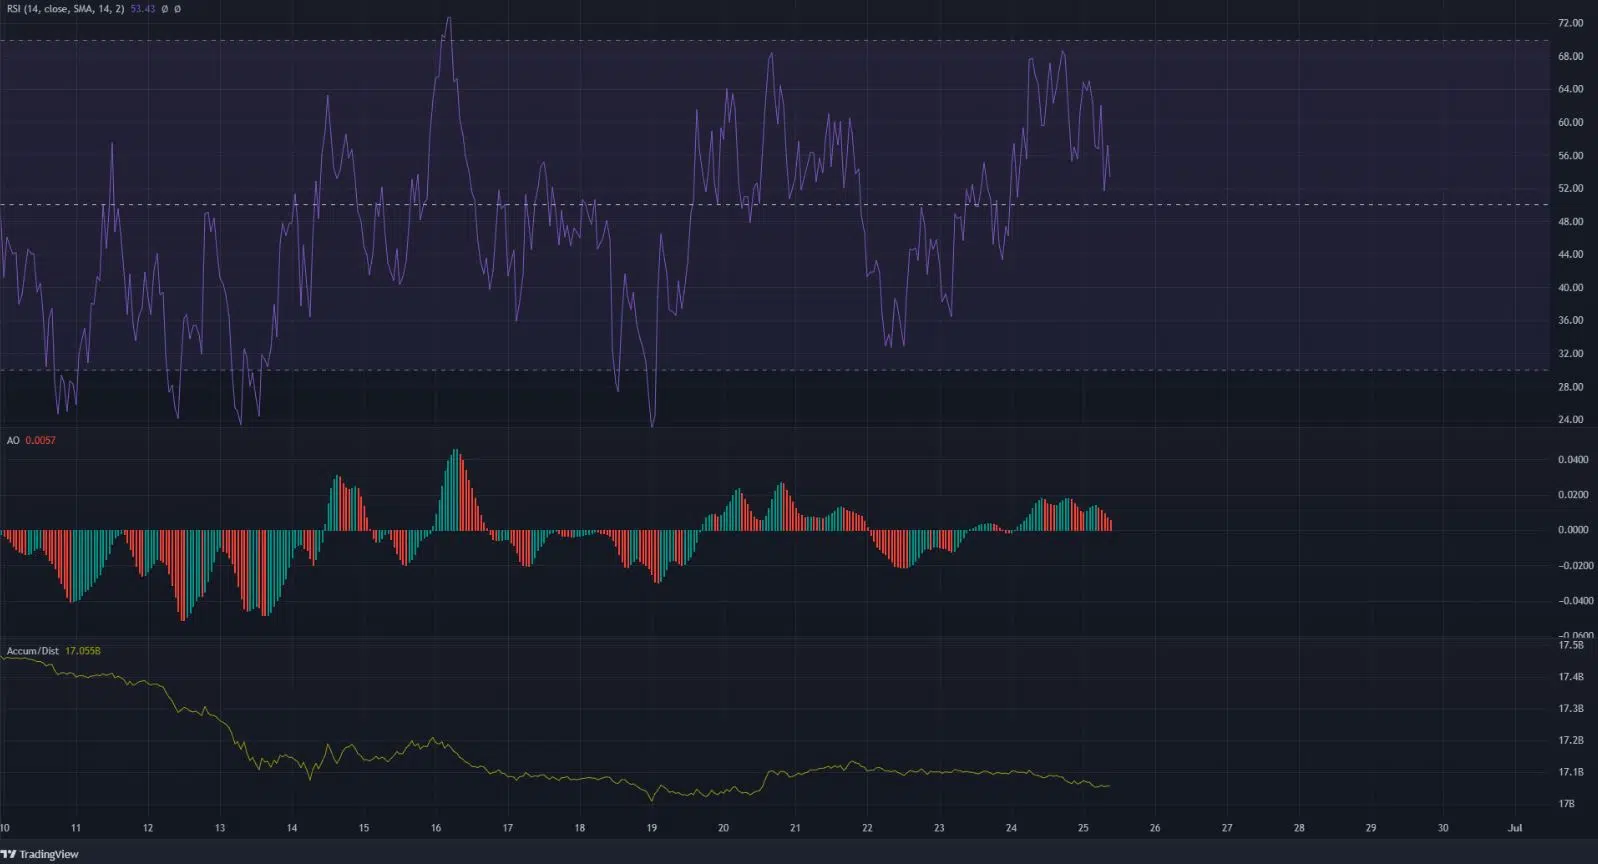 Cardano forms a triangle pattern after a bounce from range lows, can further gains be attained?